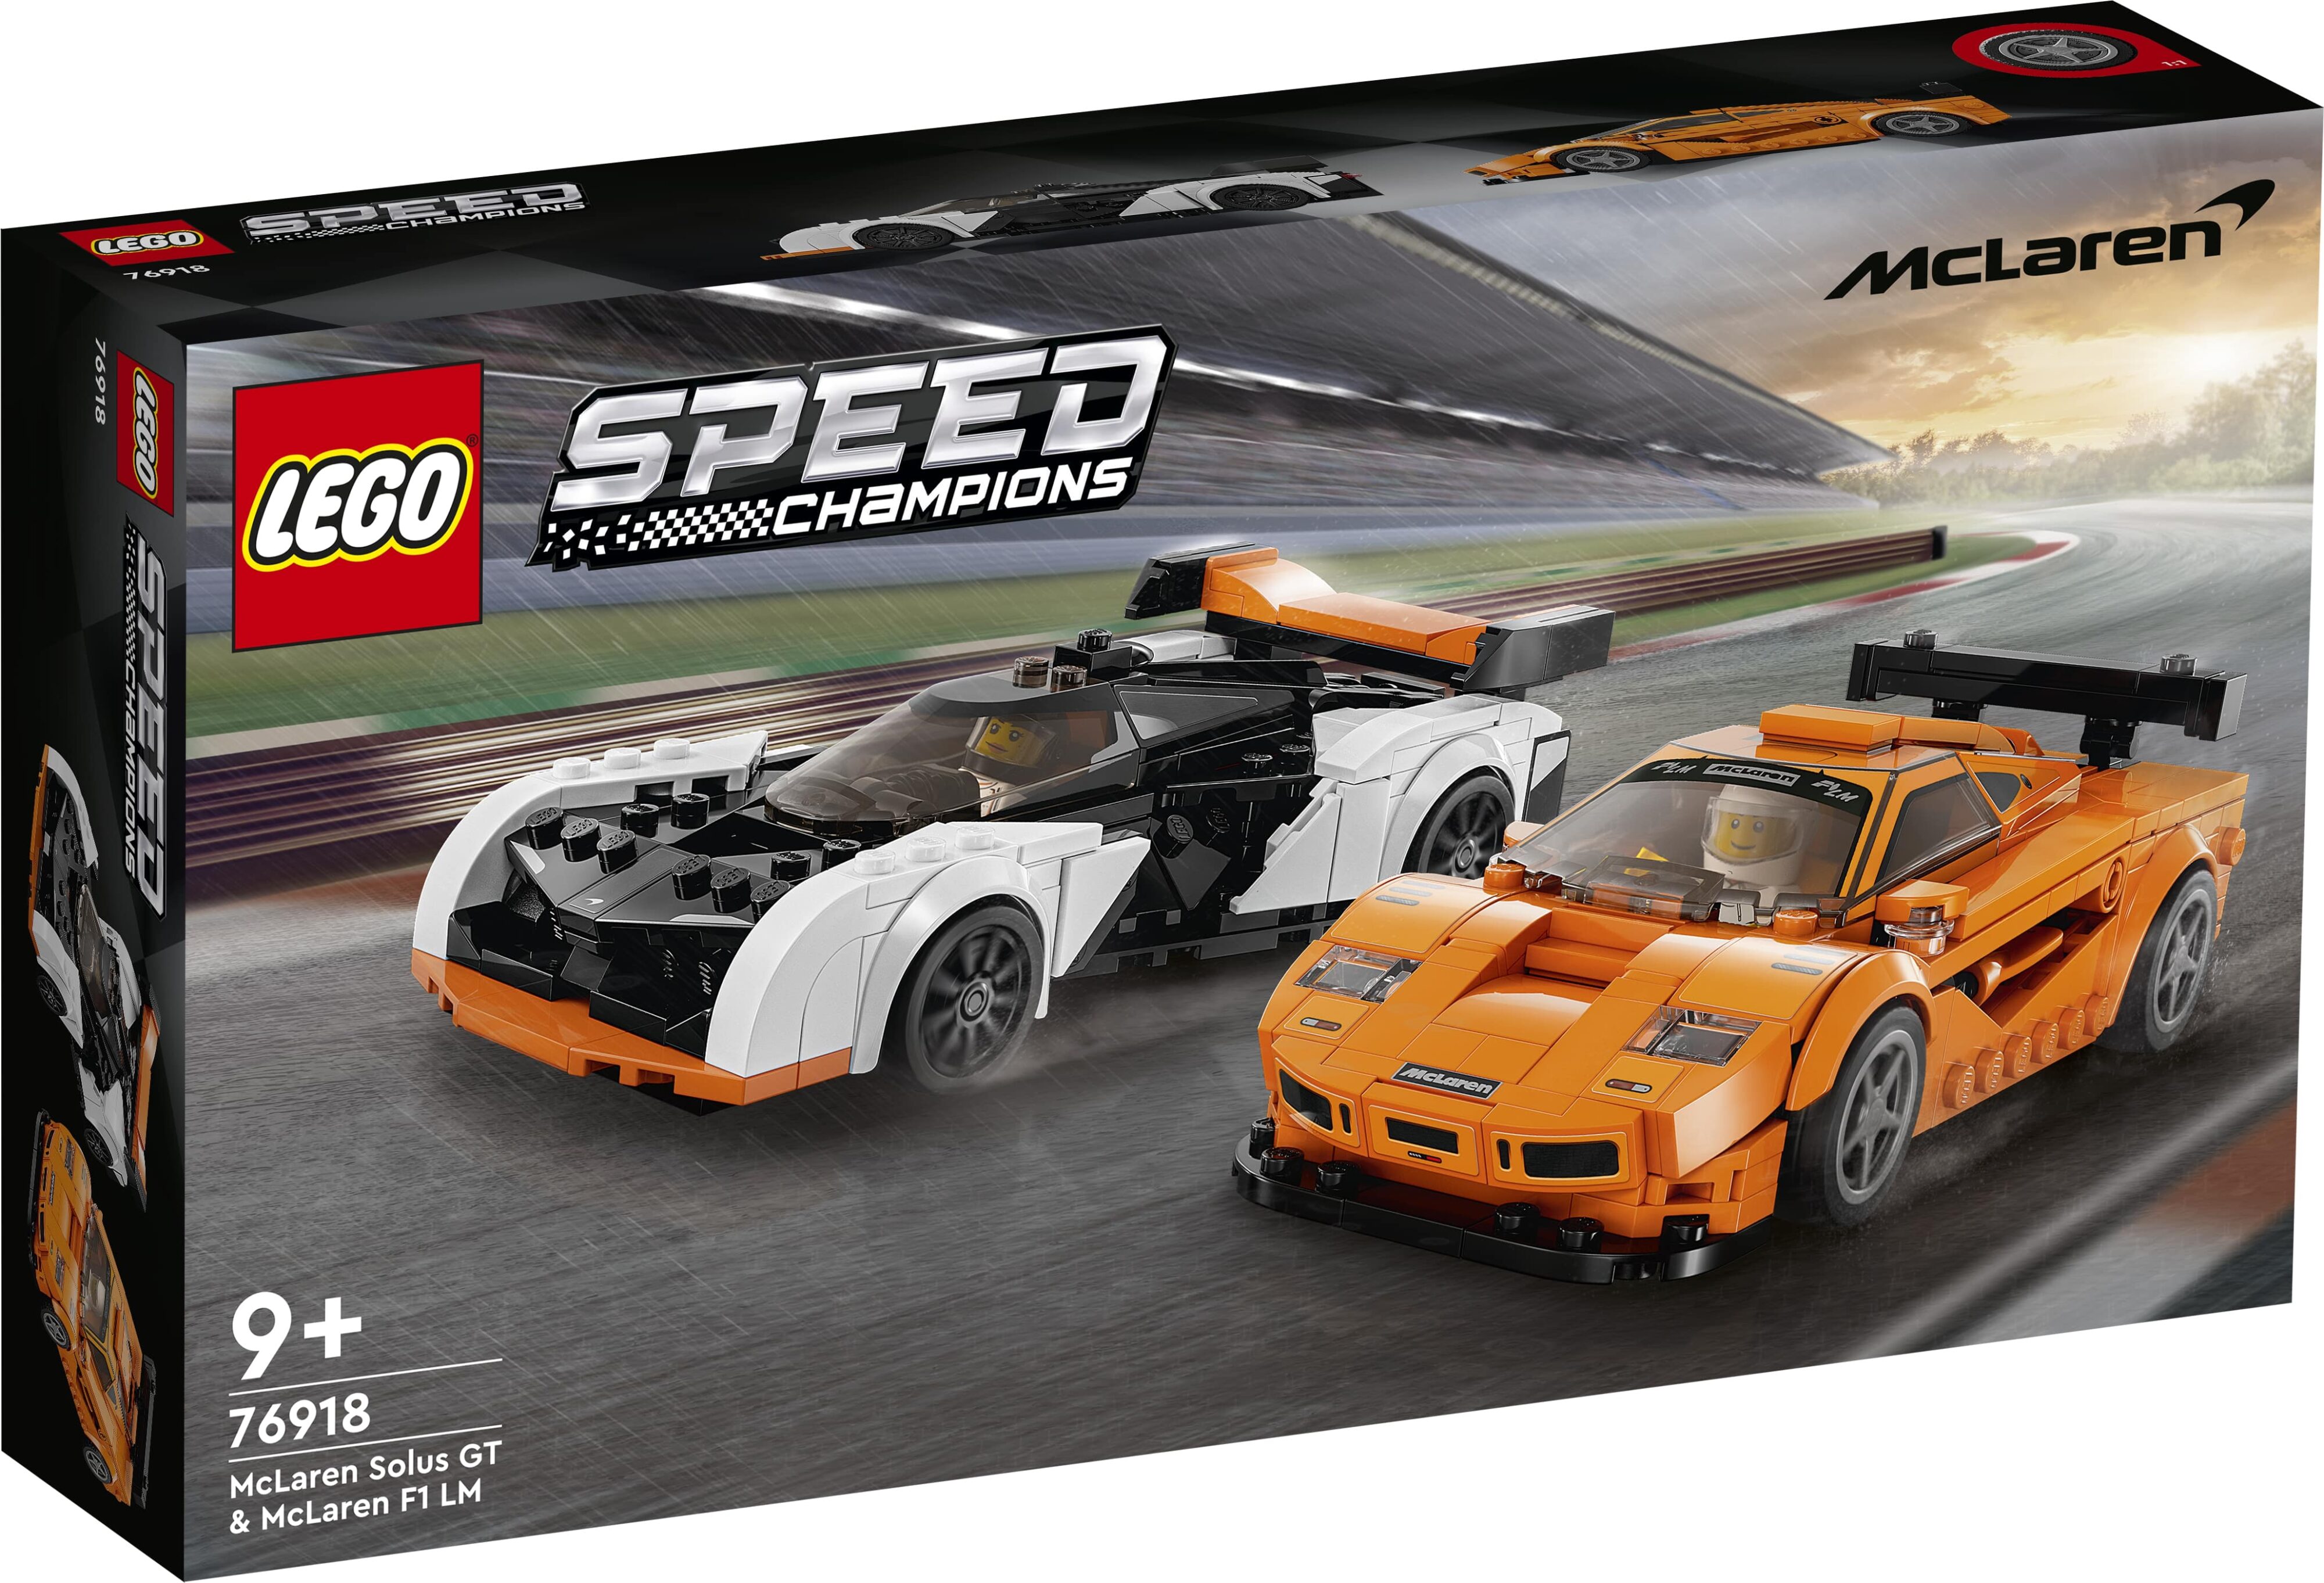 A promotional photo of the packaging for the new LEGO Speed Champions McLaren set